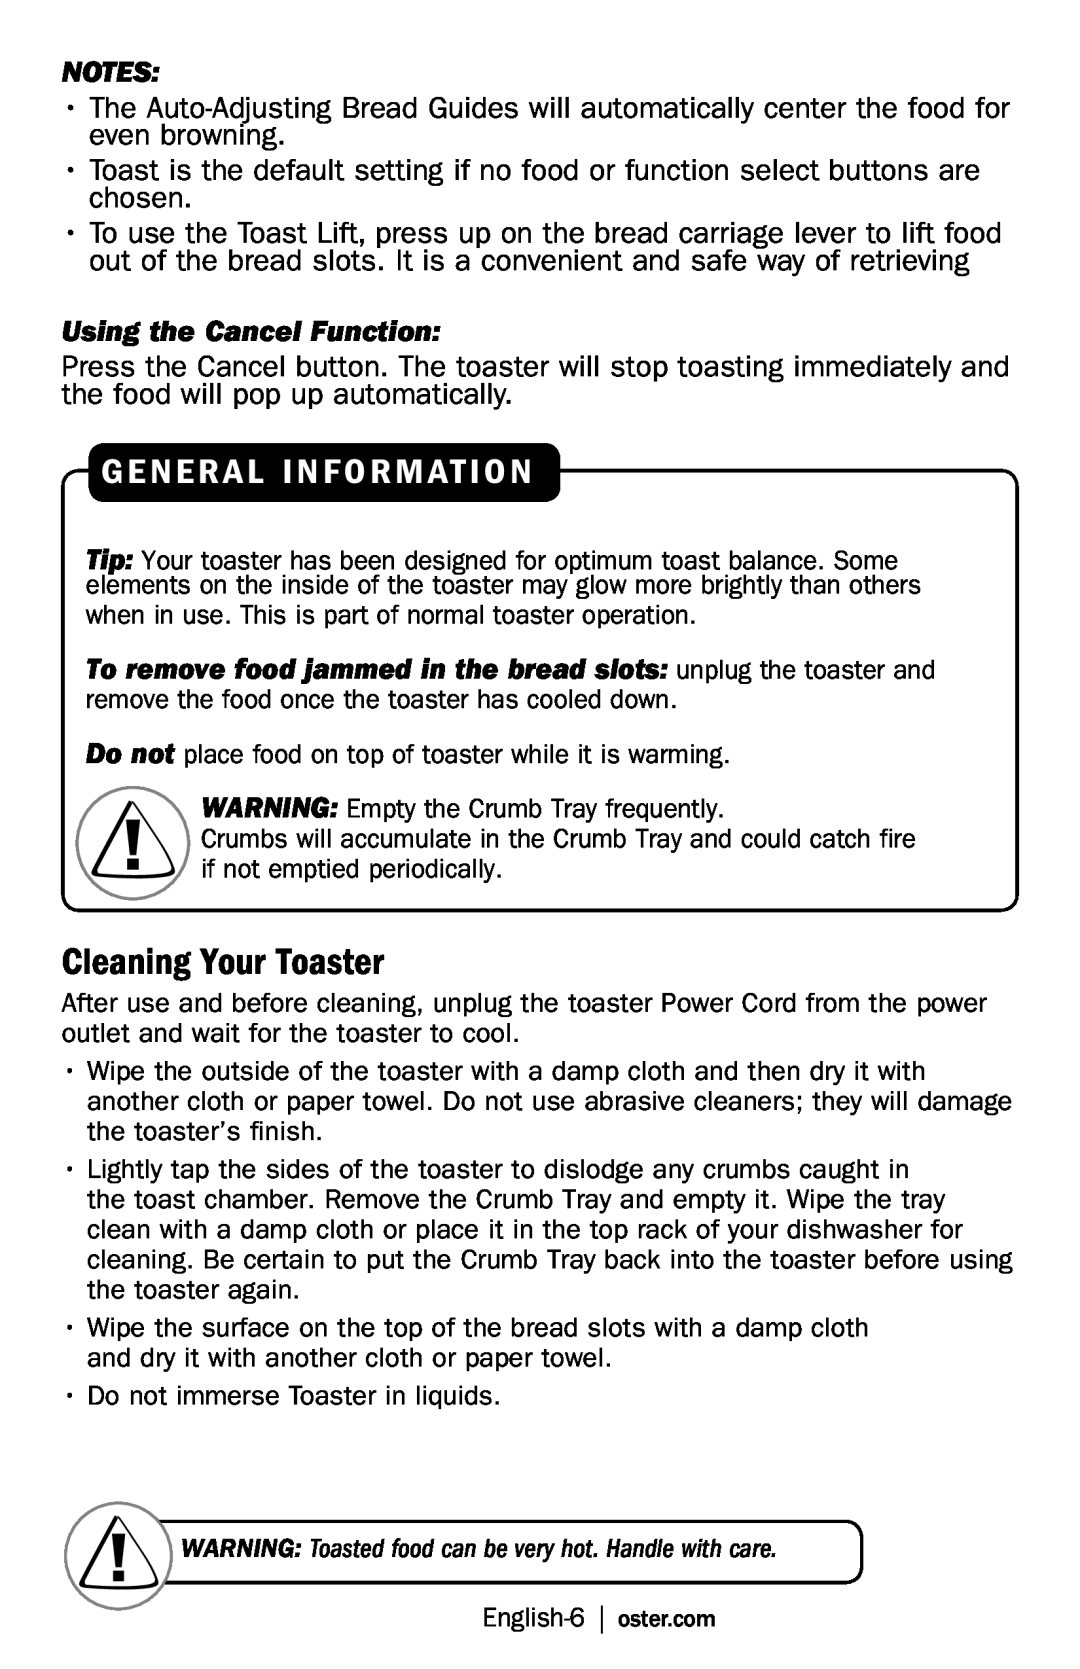 Oster Oster Toaster, TSSTJCPS01, TSSTJCPSR1 user manual Cleaning Your Toaster, General Information, Using the Cancel Function 